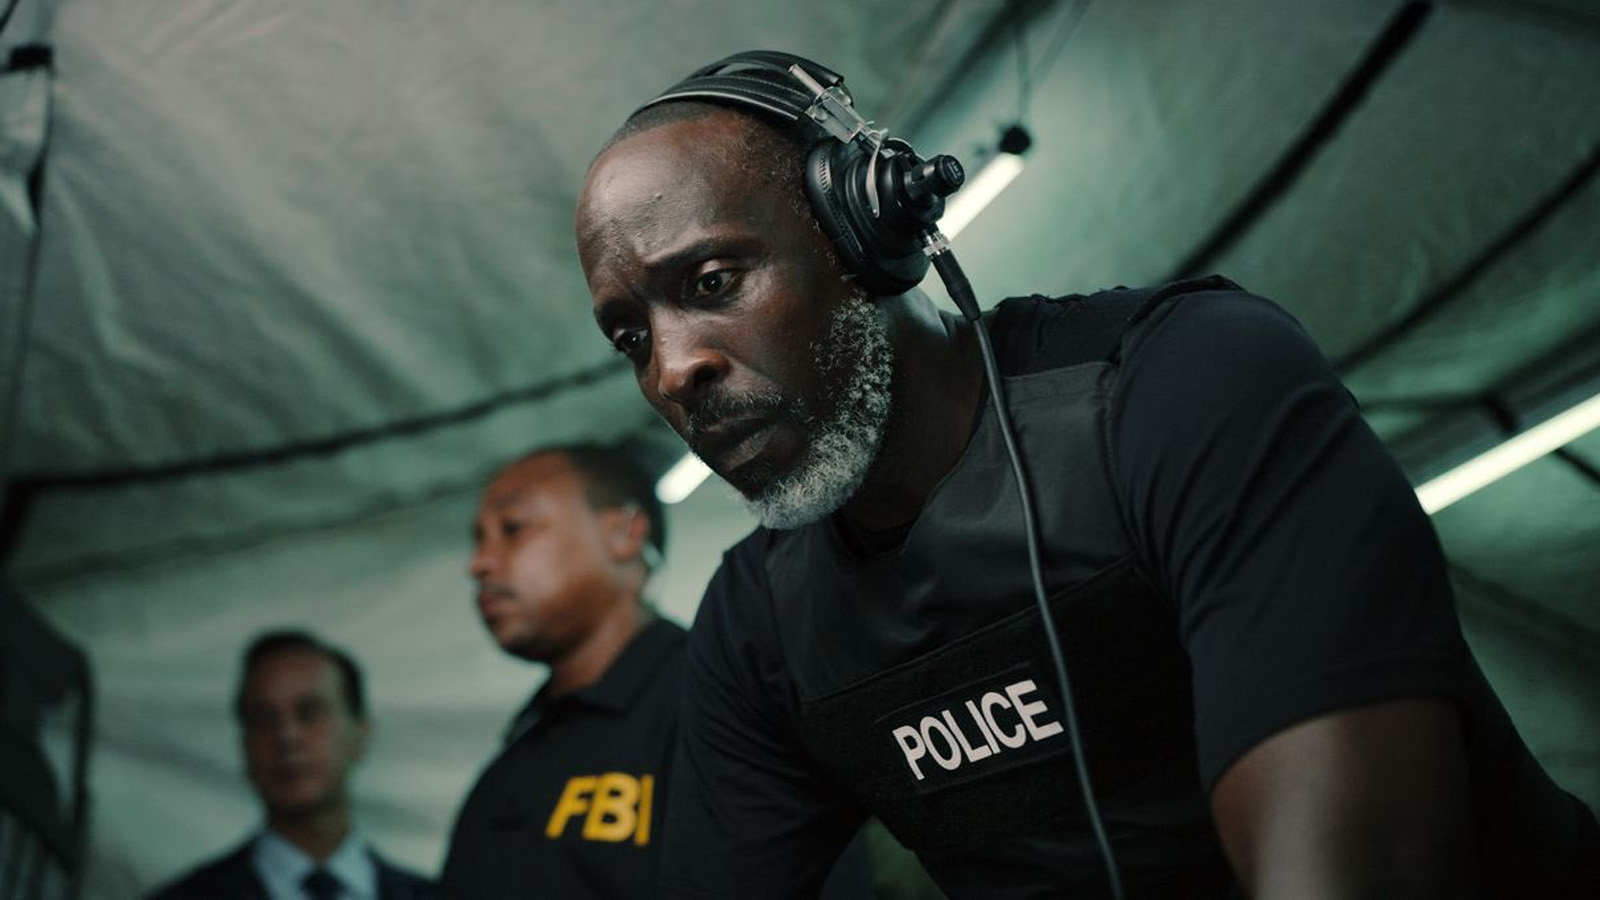 Michael K. Williams’ character is based on real-life negotiator Sgt. Andre Bates.